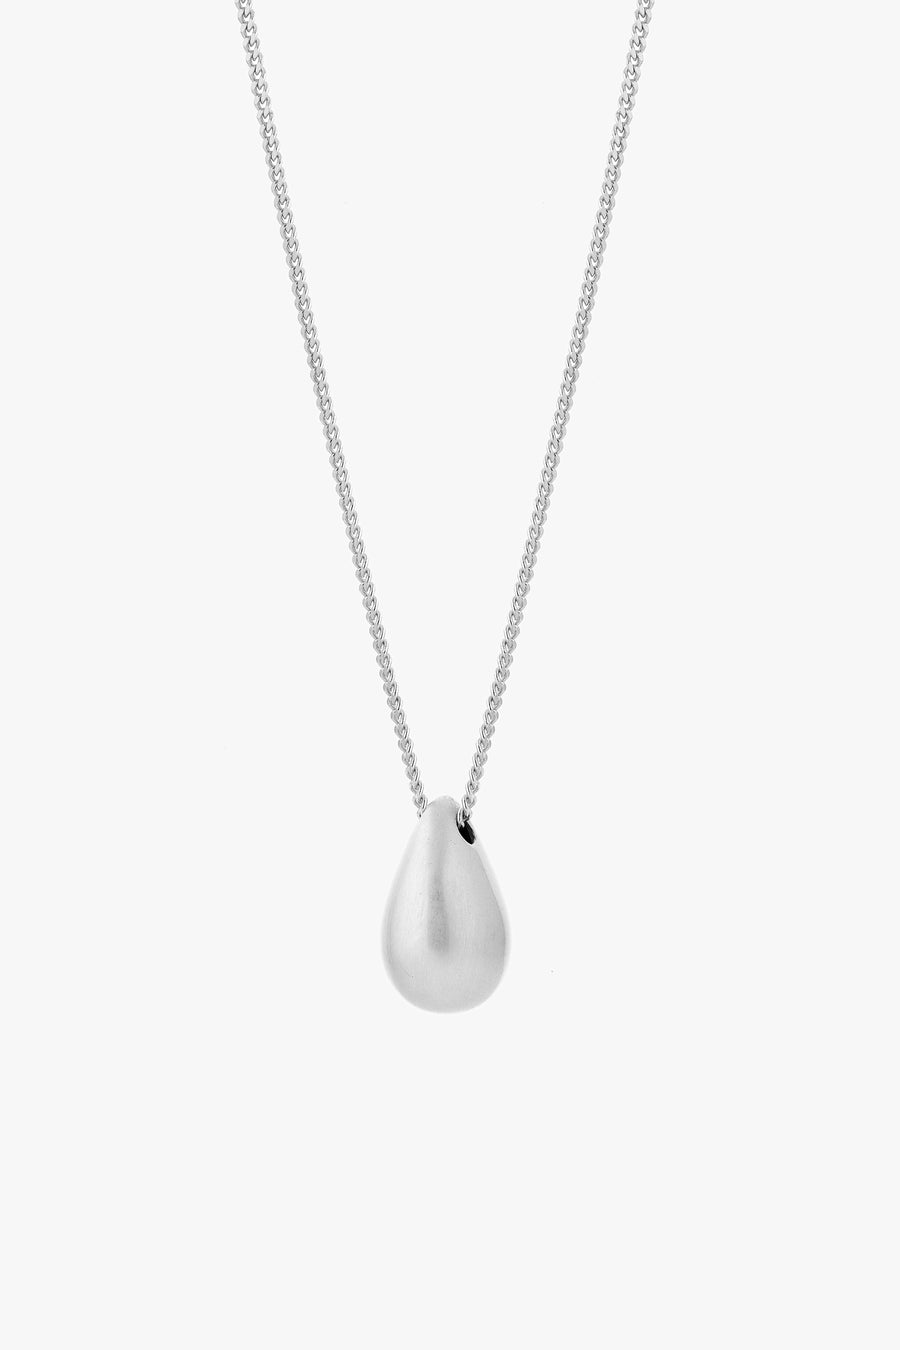 HUSH NECKLACE SILVER